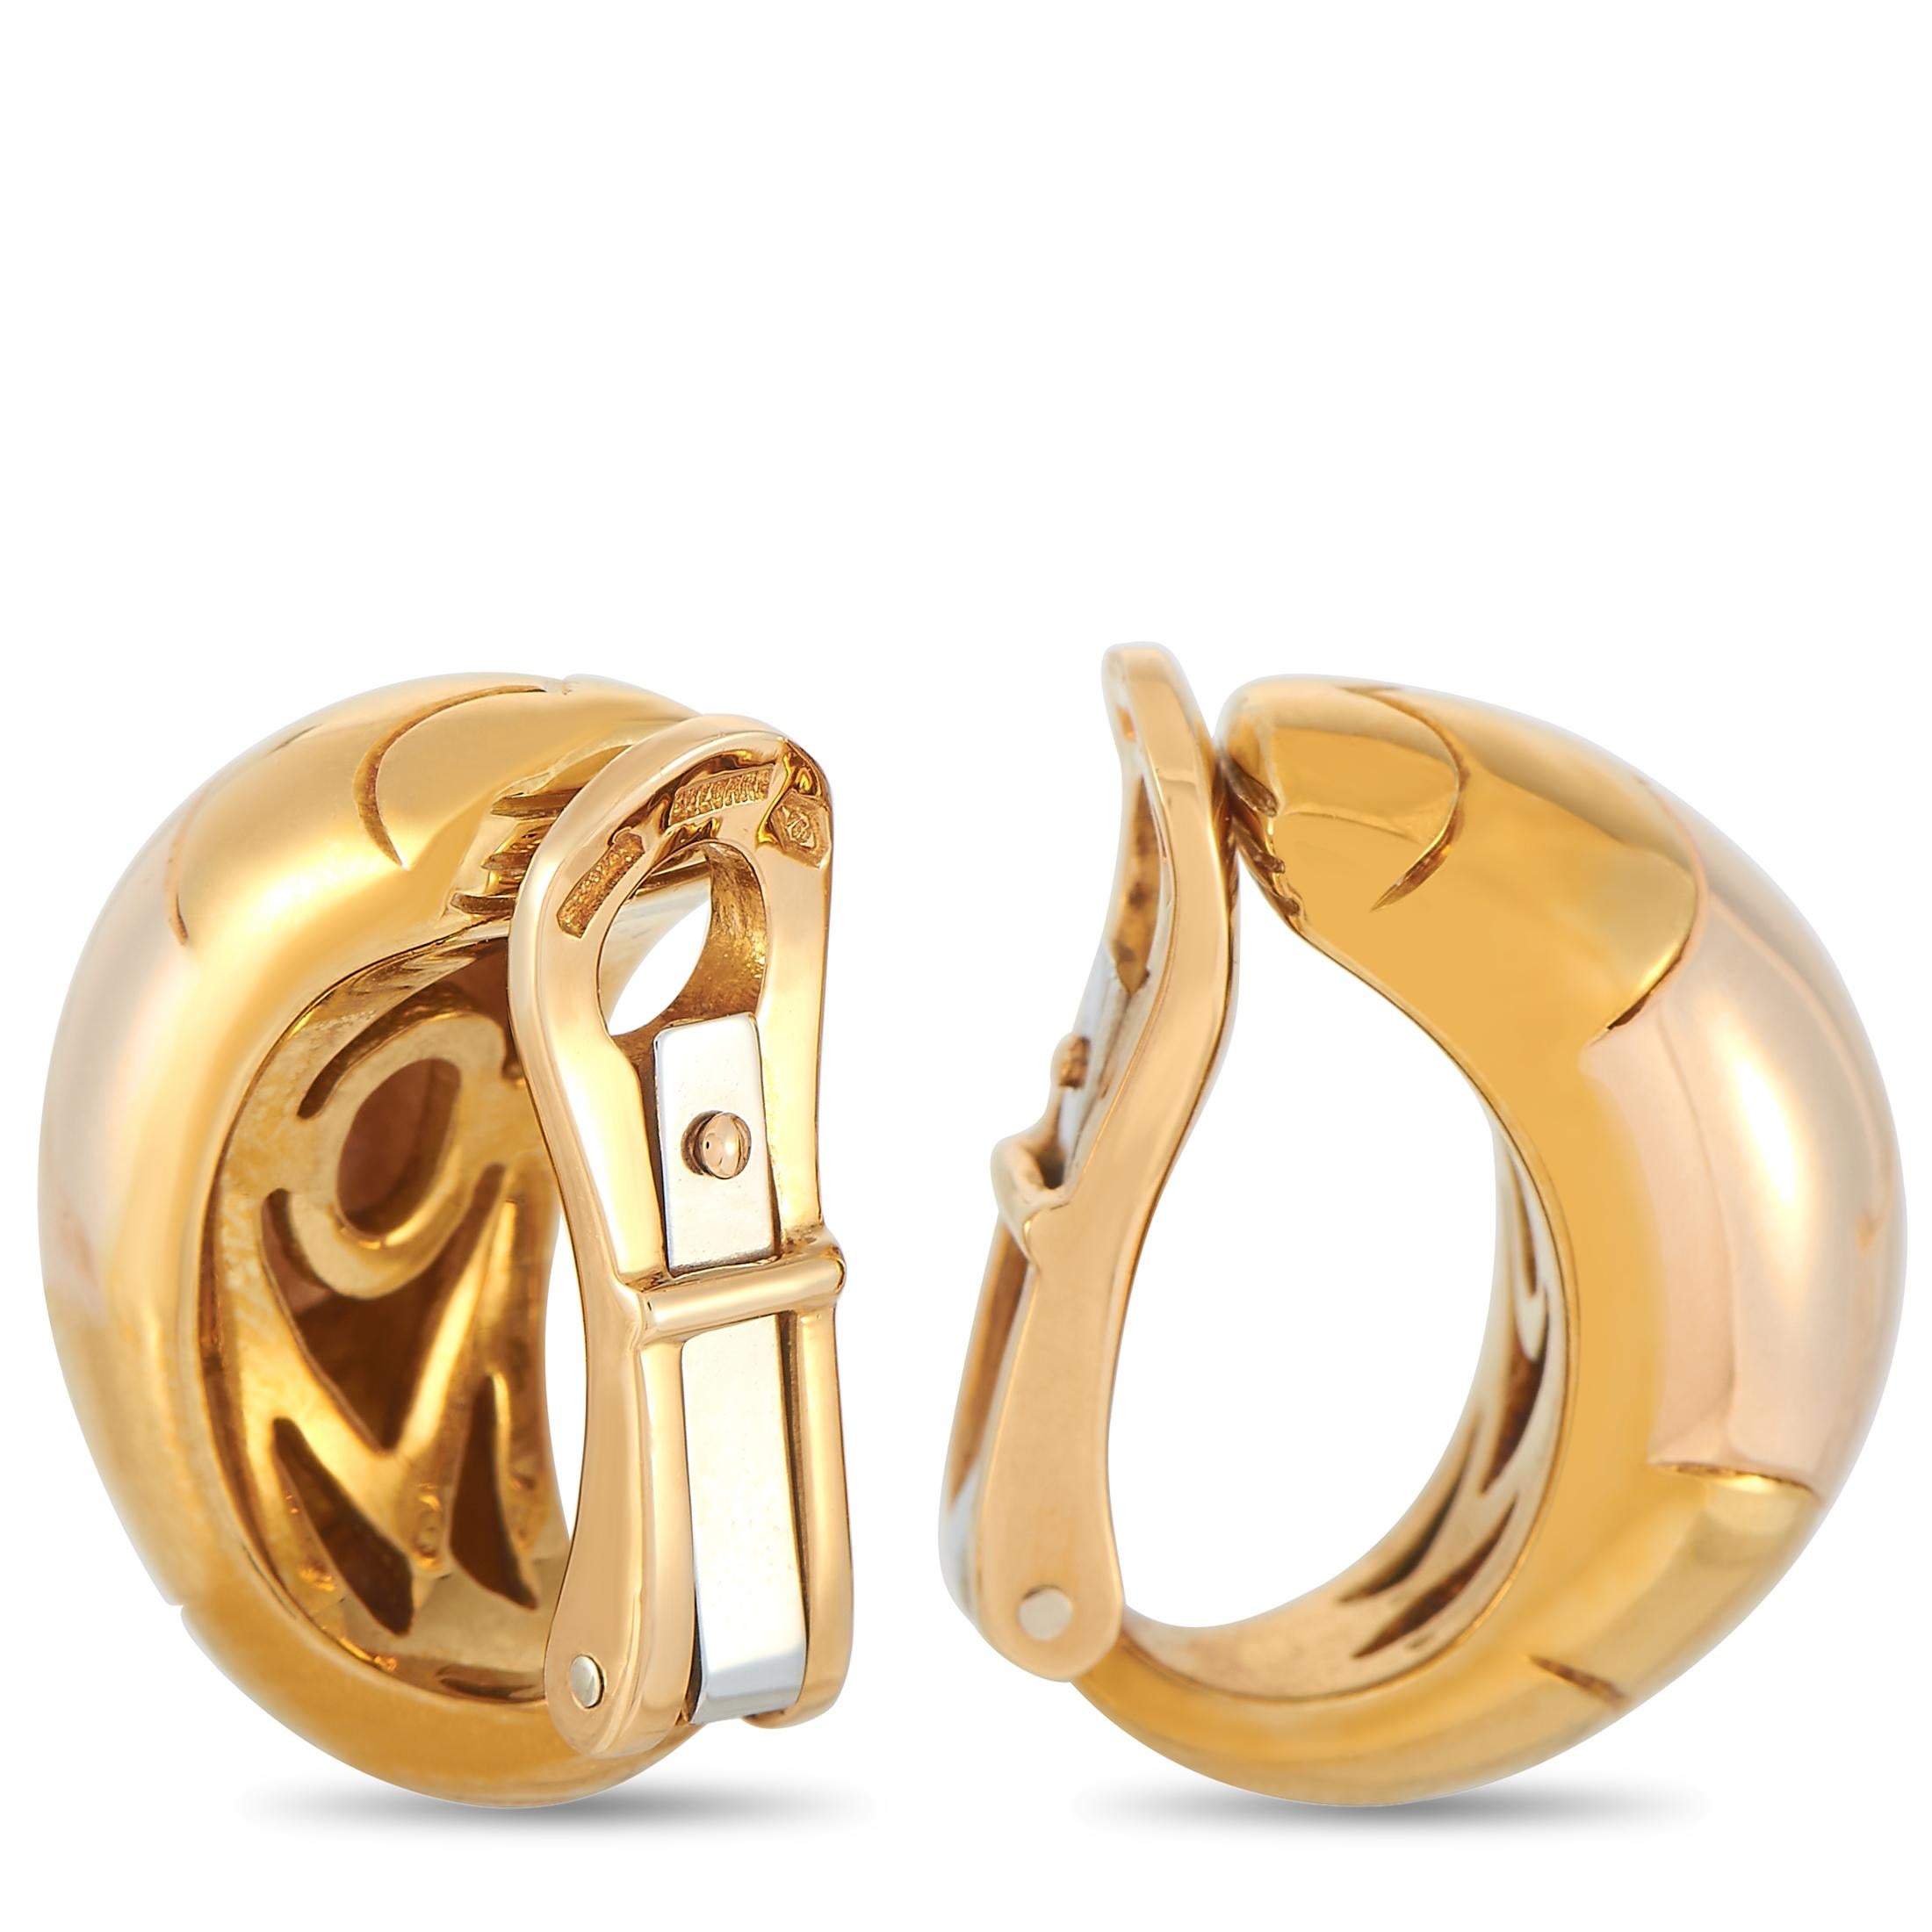 These Bvlgari earrings are crafted from 18K yellow gold and each of the two weighs 8.7 grams. The earrings measure 0.88” in length and 0.37” in width.
 
 The pair is offered in estate condition and includes a gift box.